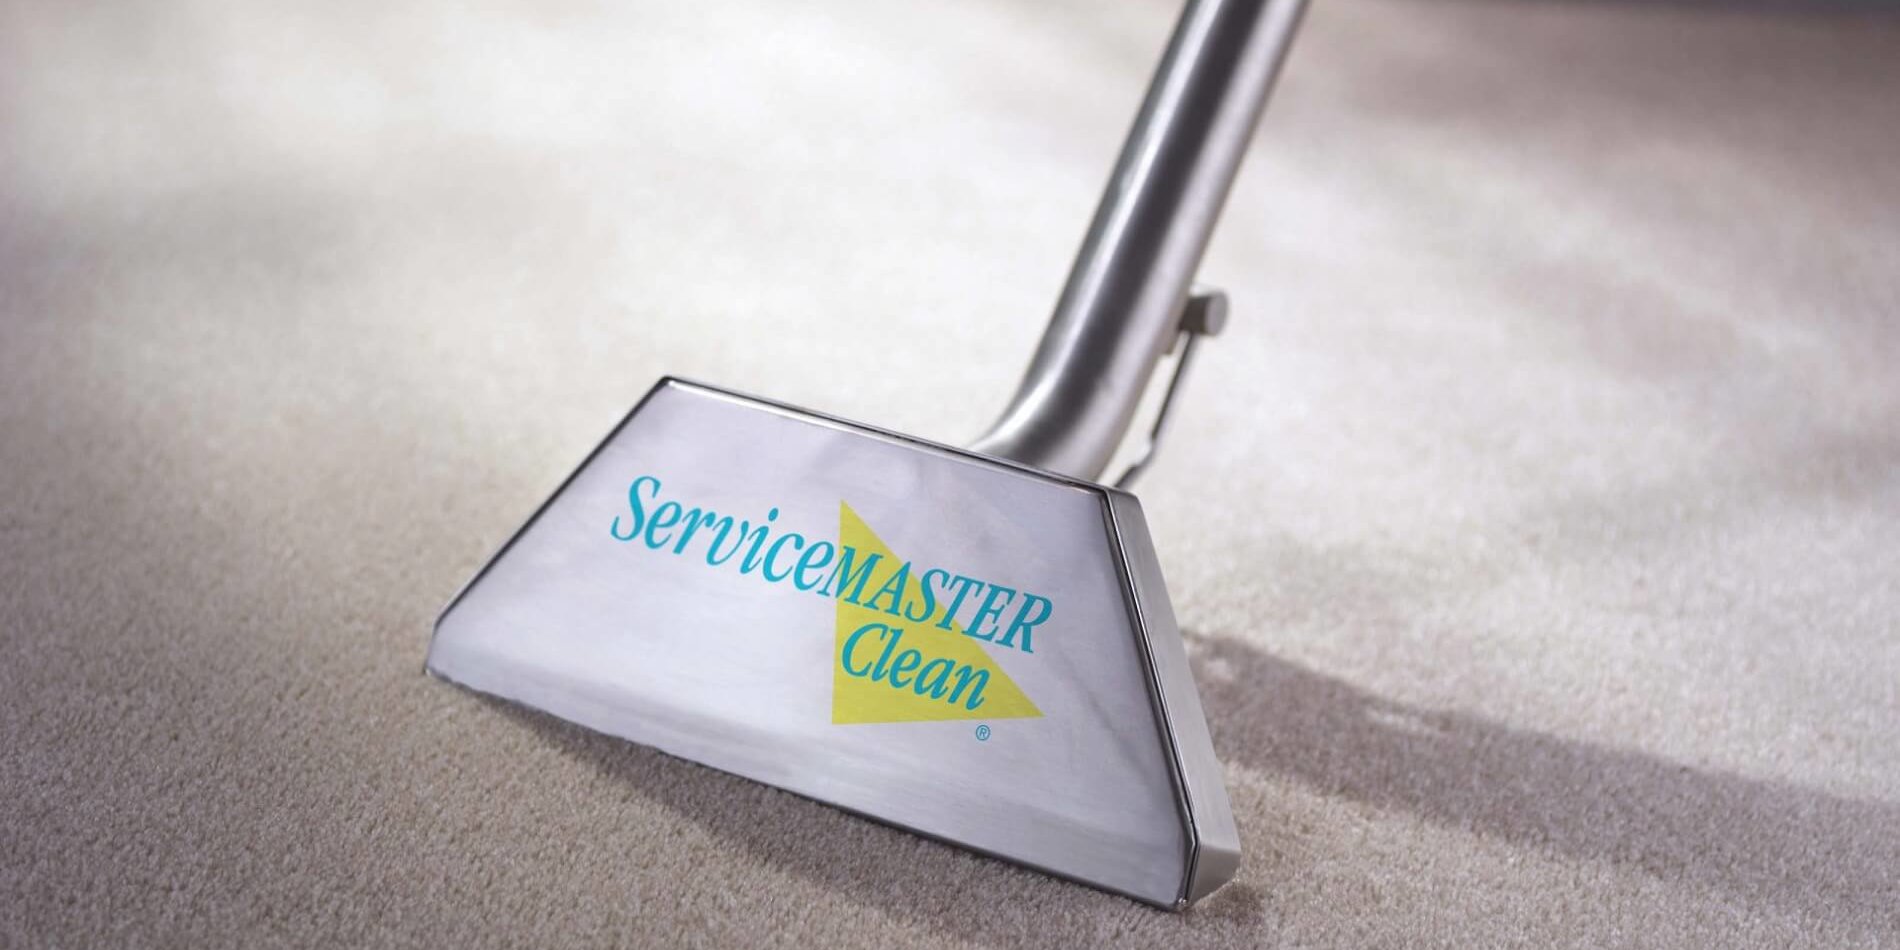 servicemaster clean branded vacuum cleaning carpet